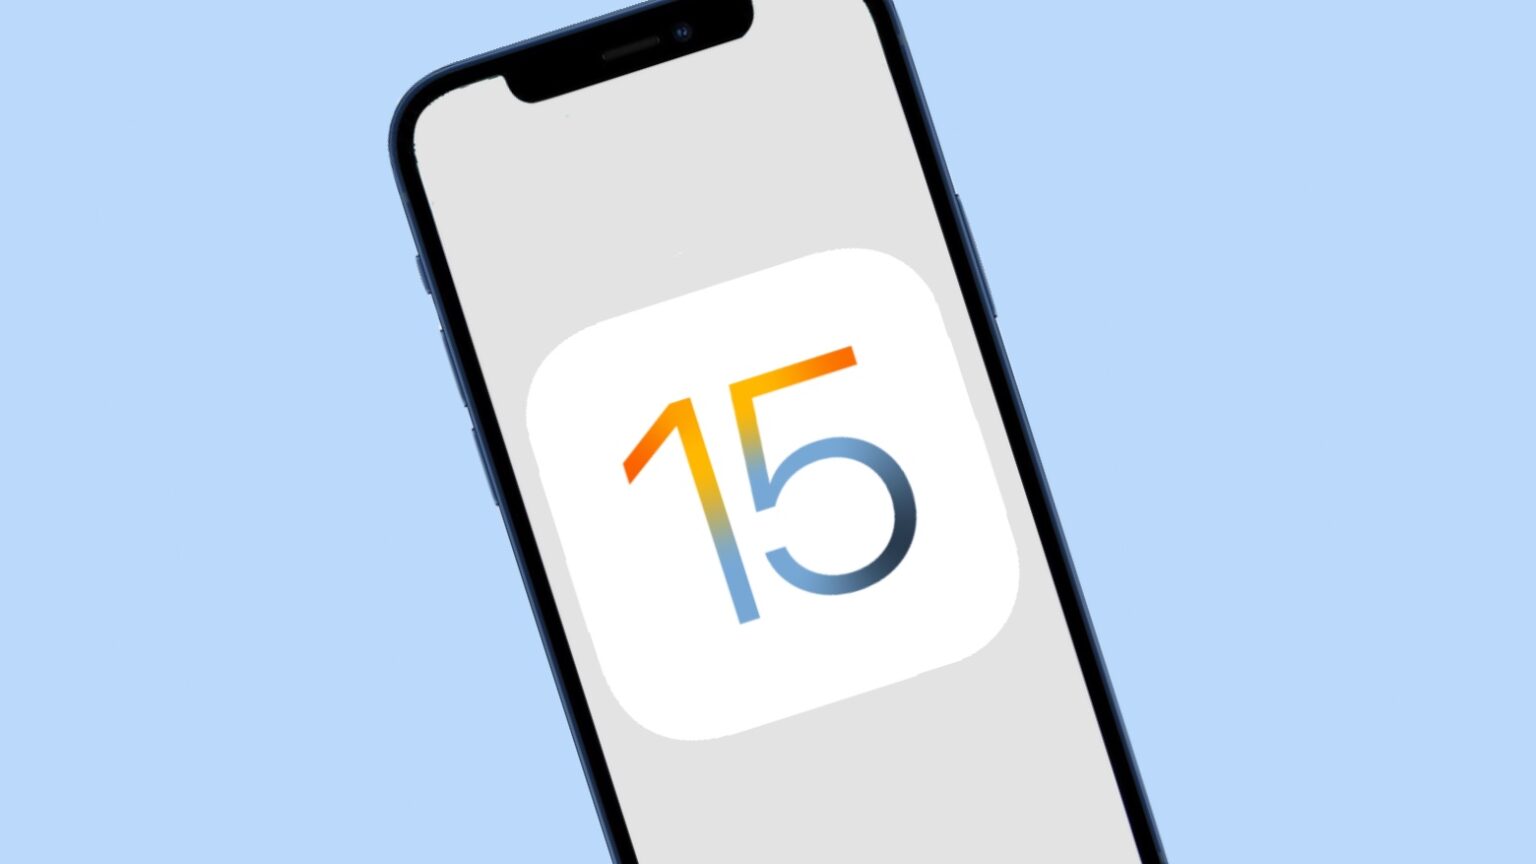 iOS 15 has been replaced by iOS 15.0.1.